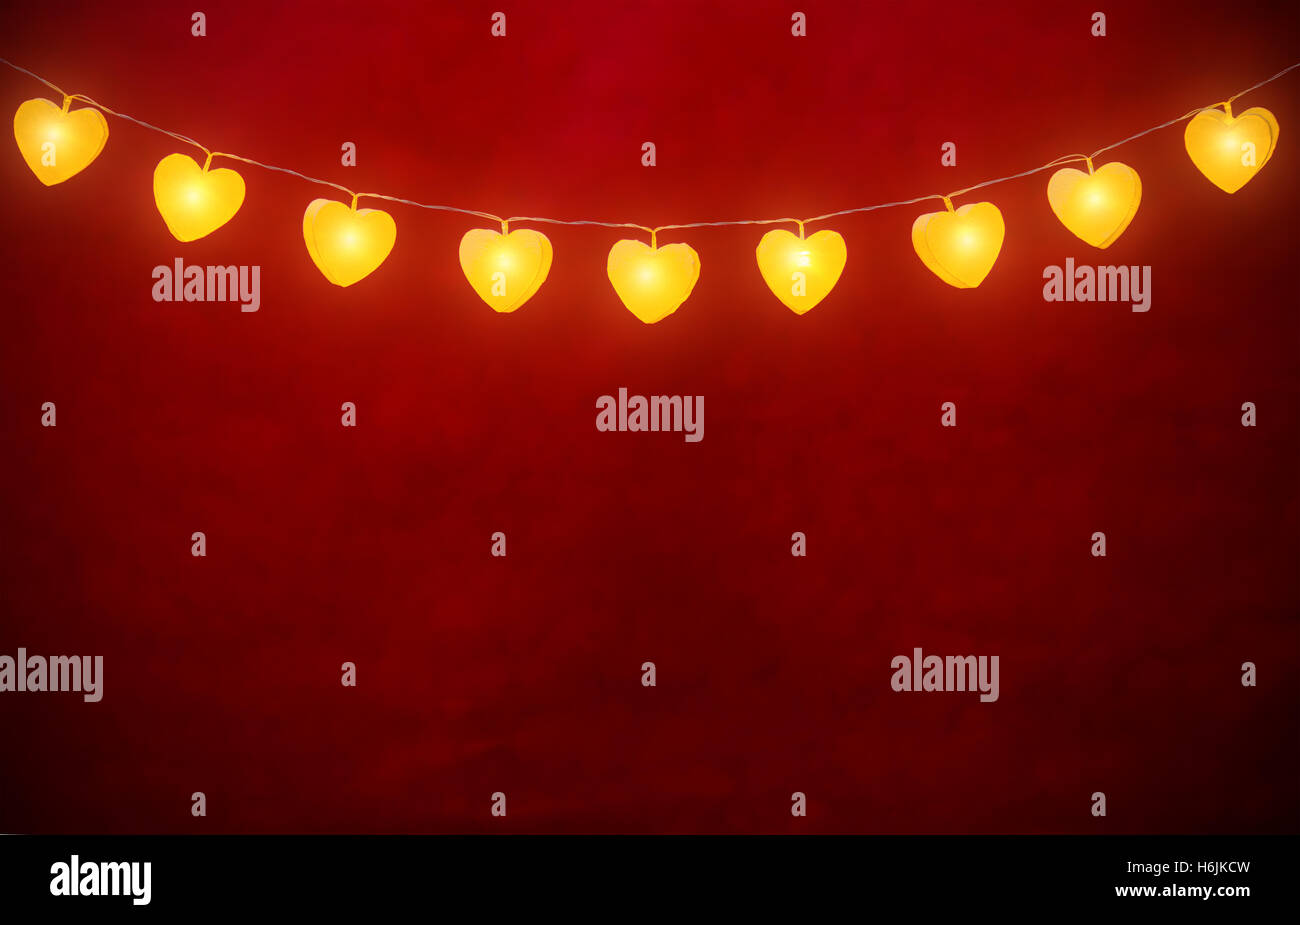 Hanging lights in heart shapes on rope with abstract empty red background Stock Photo